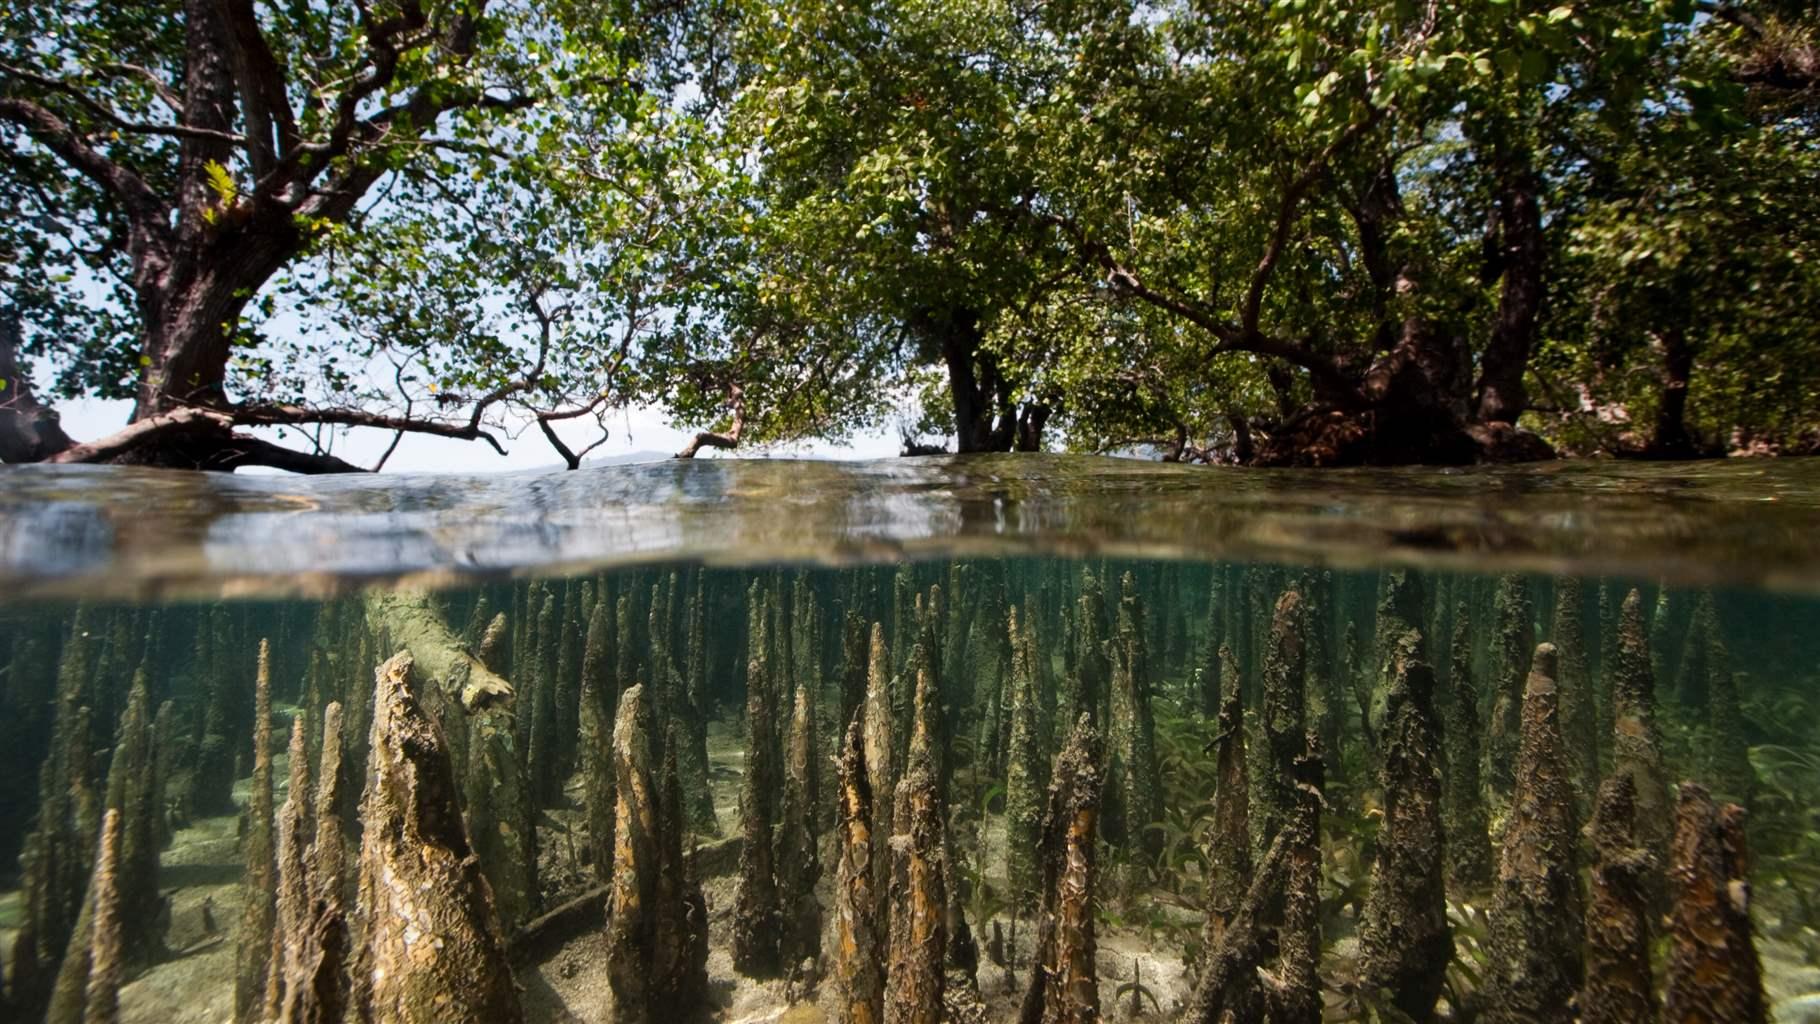 The water level rises above a group of mangroves during high tide, with submerged trees sharply visible in the clear water. Taller trees rise above the water surface in the background.